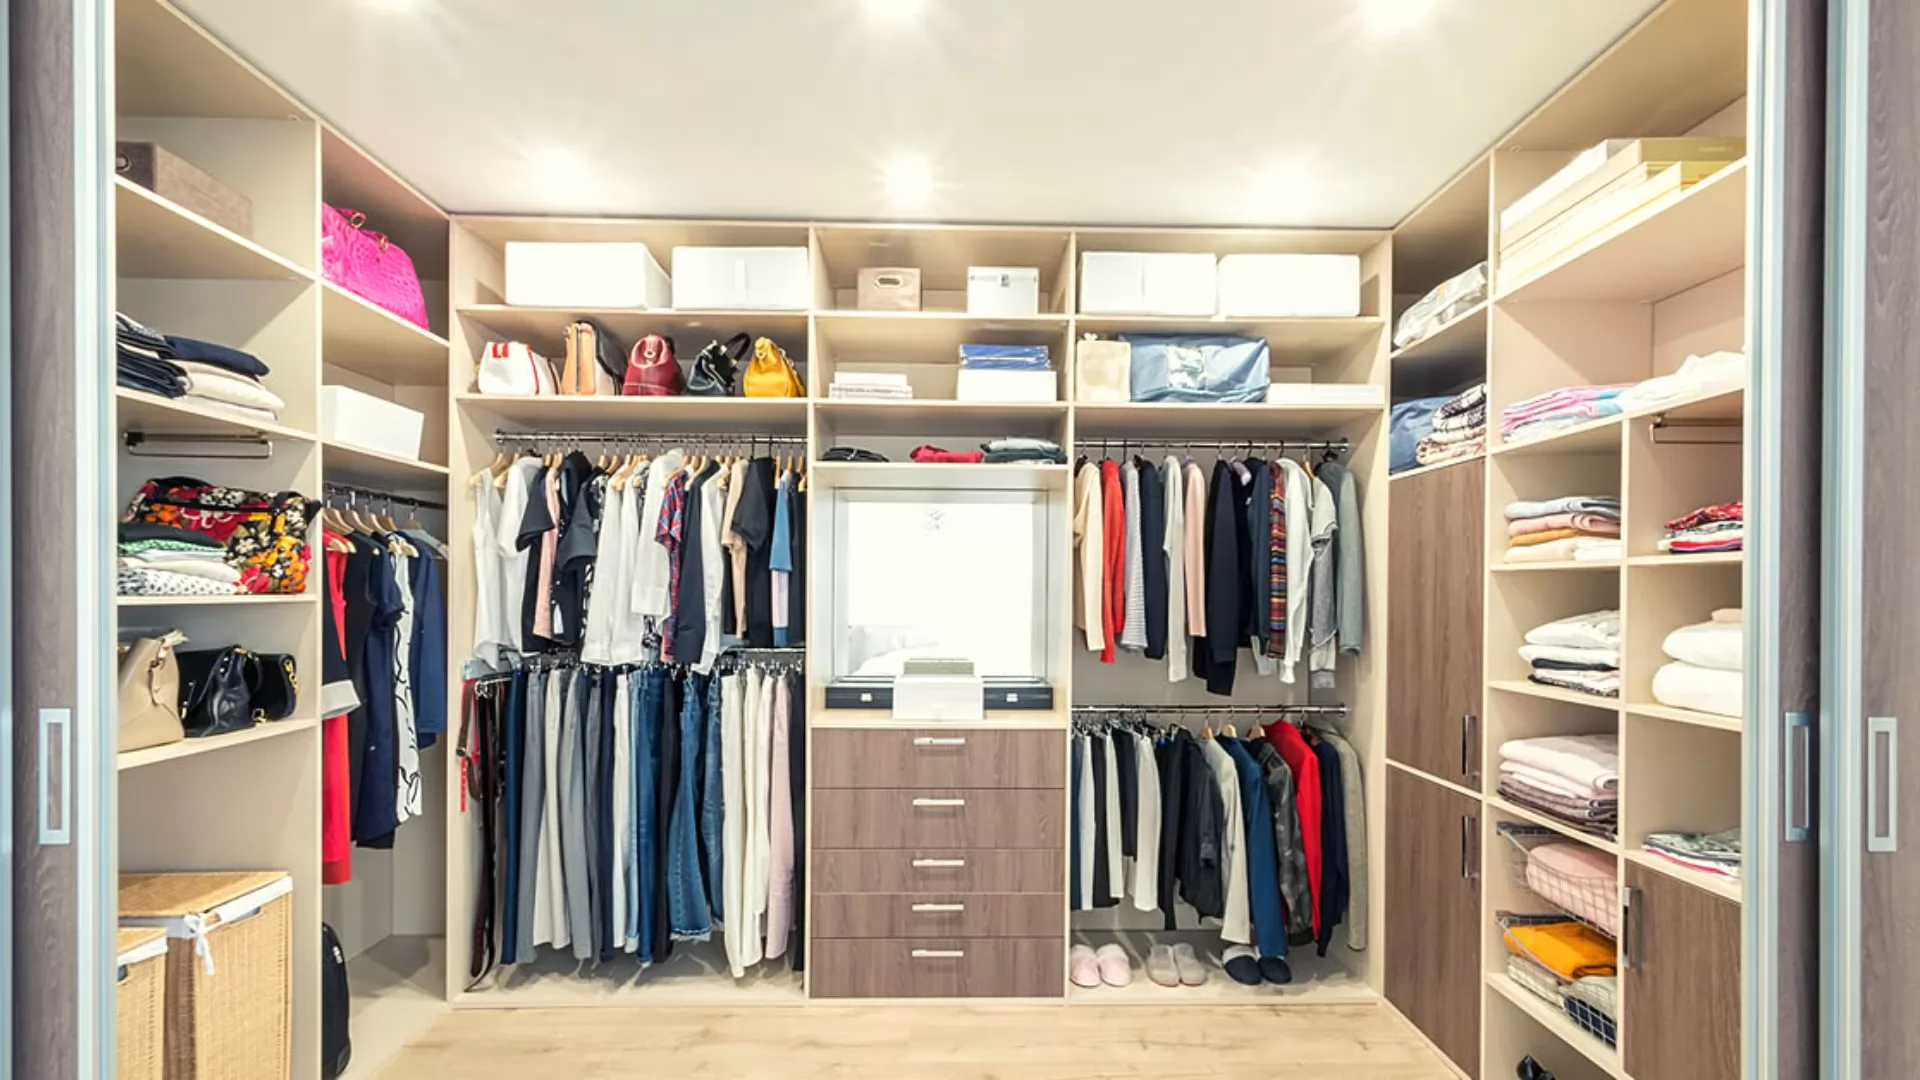 How to build a wardrobe that's both stylish and pocket-friendly?